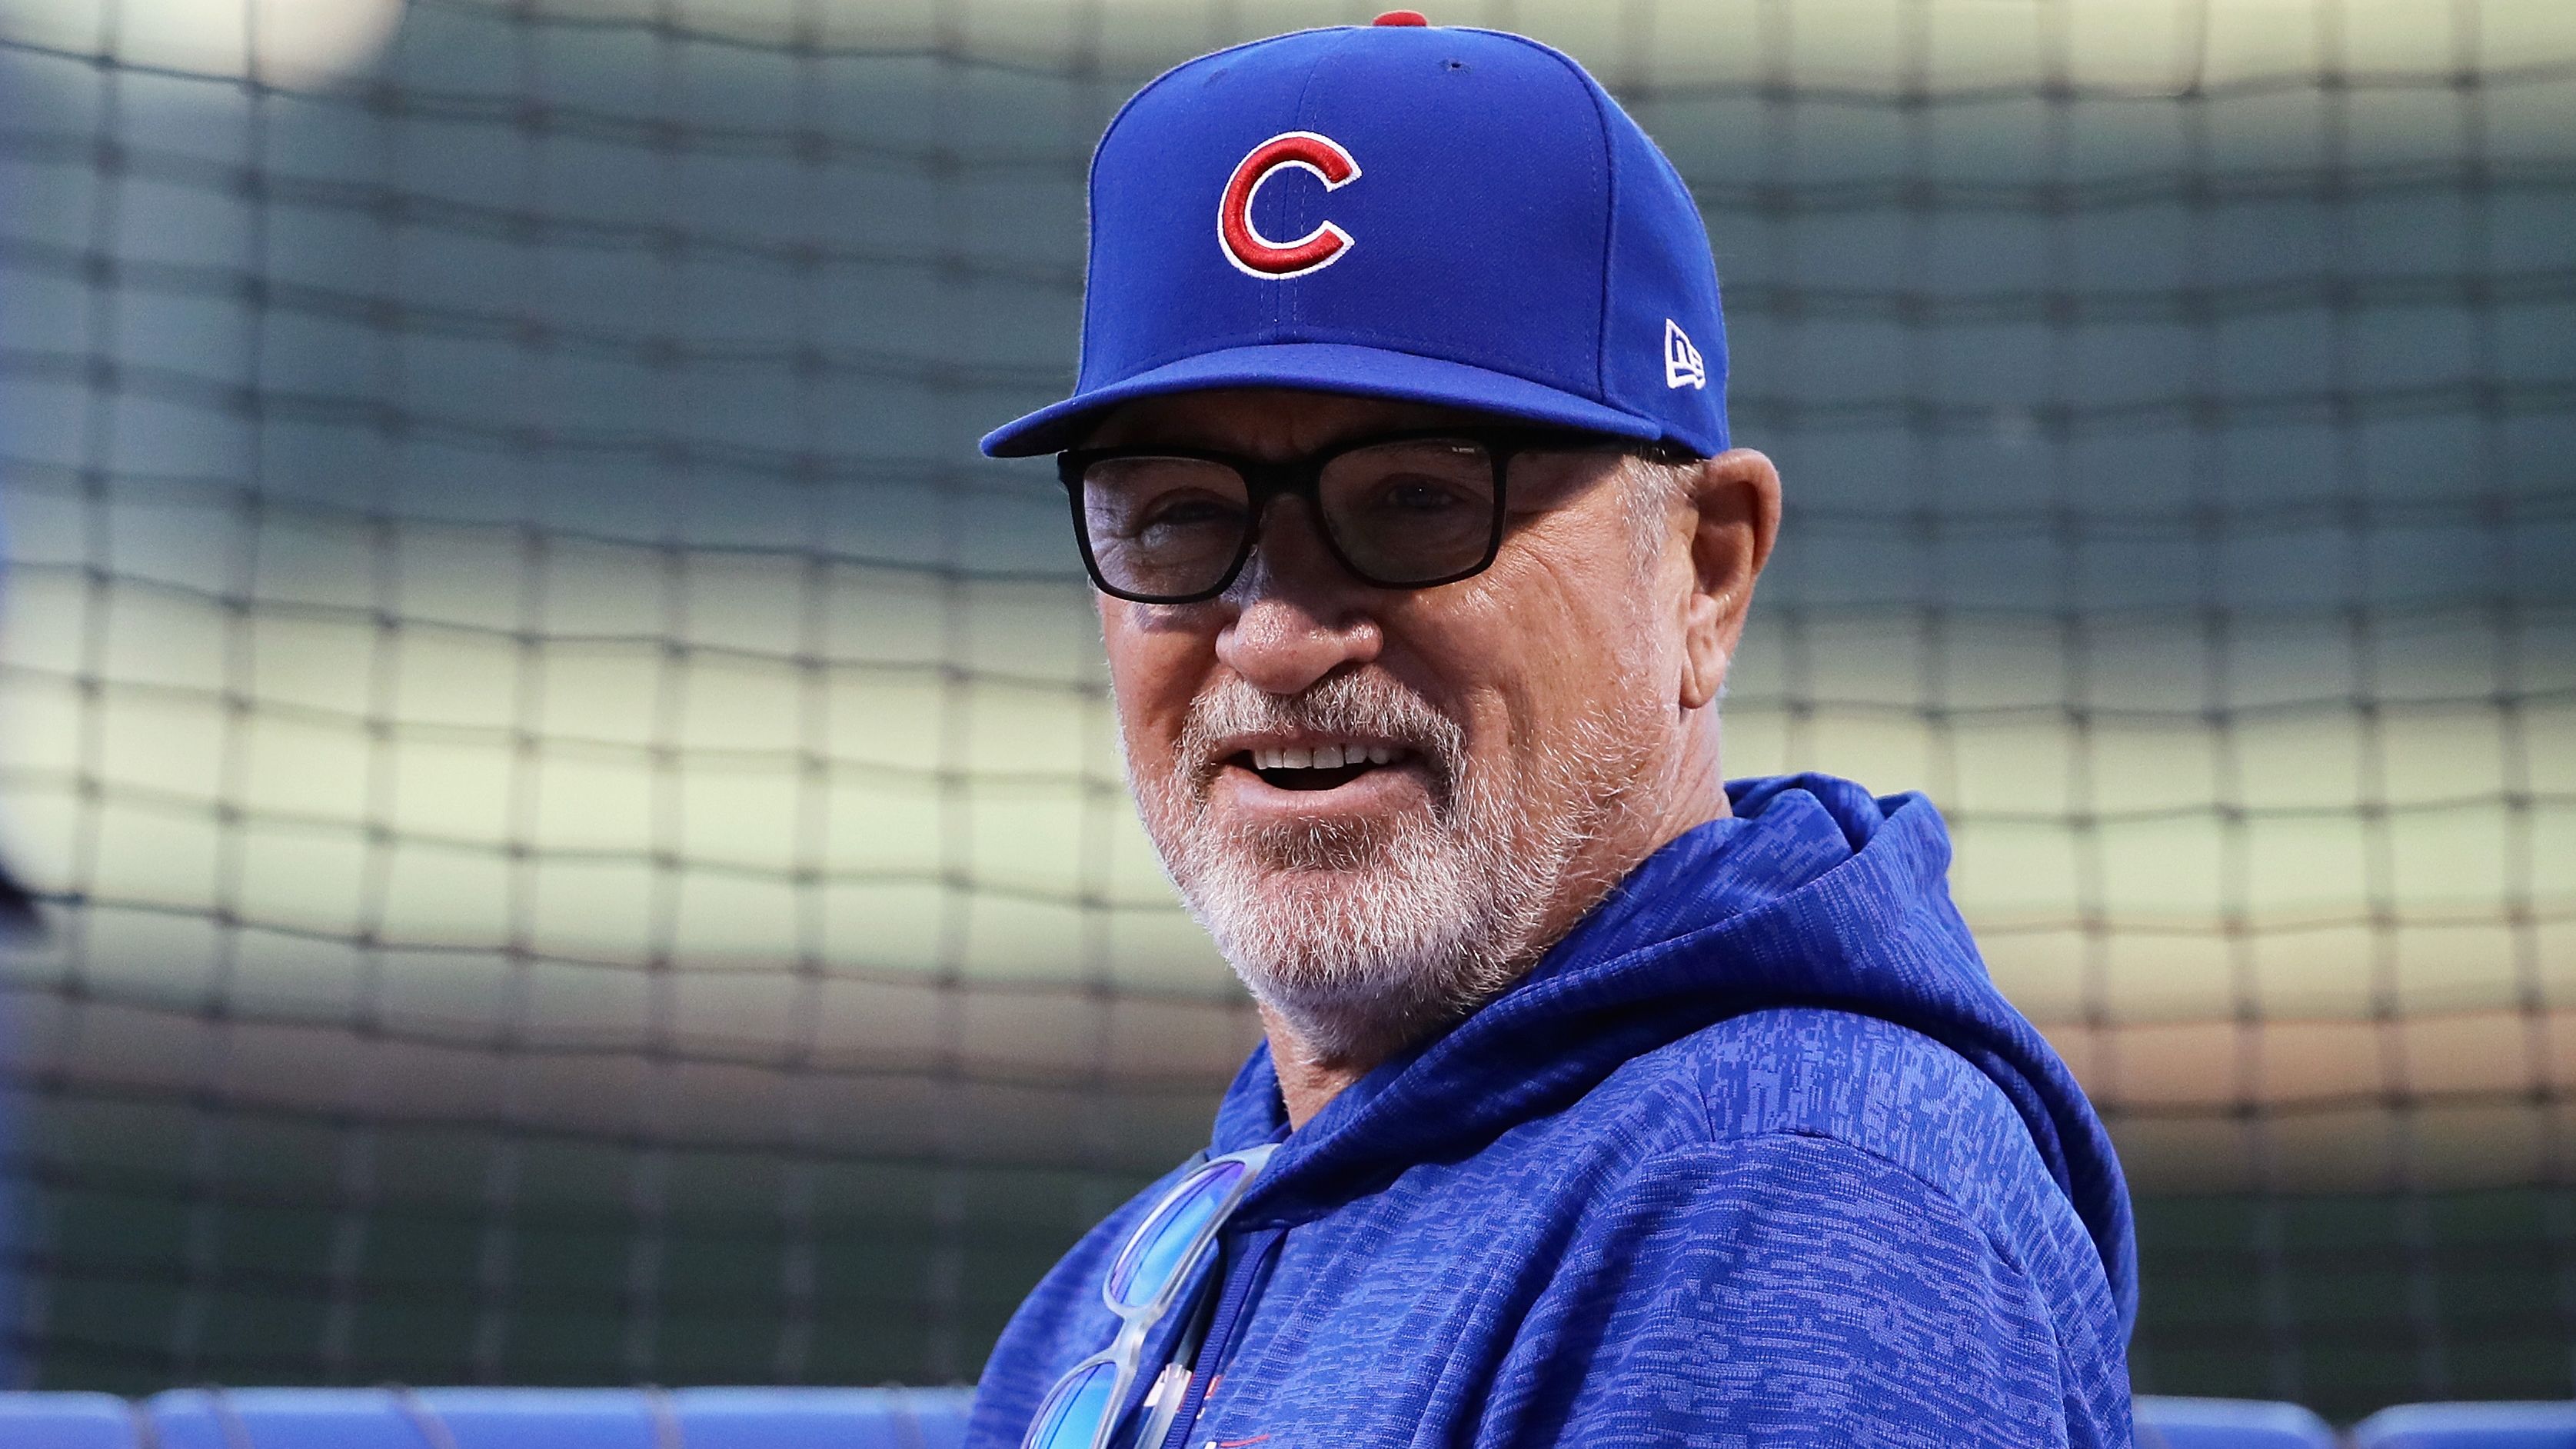 In Trump era, Cubs manager Joe Maddon welcomes immigrants in his hometown